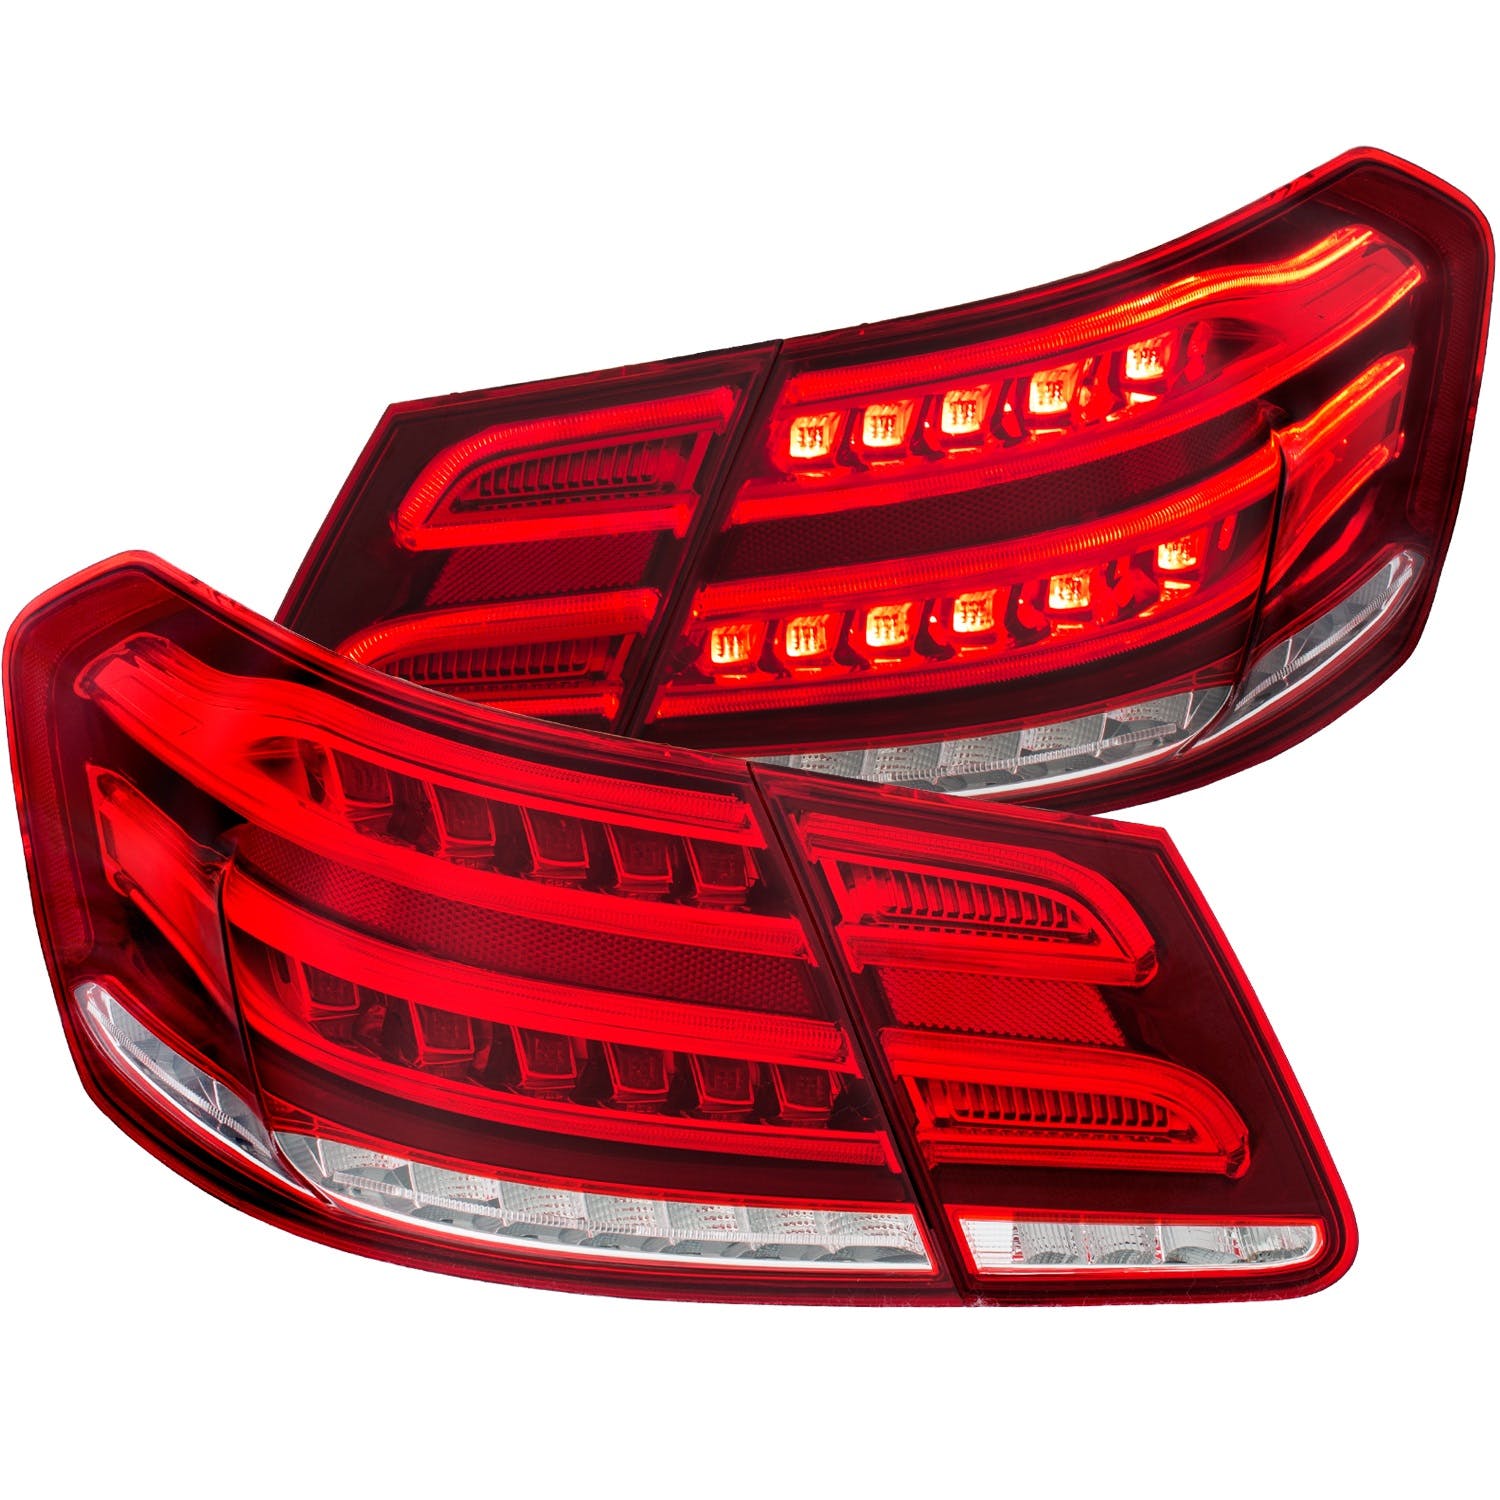 AnzoUSA 321331 LED Taillights Red/Clear